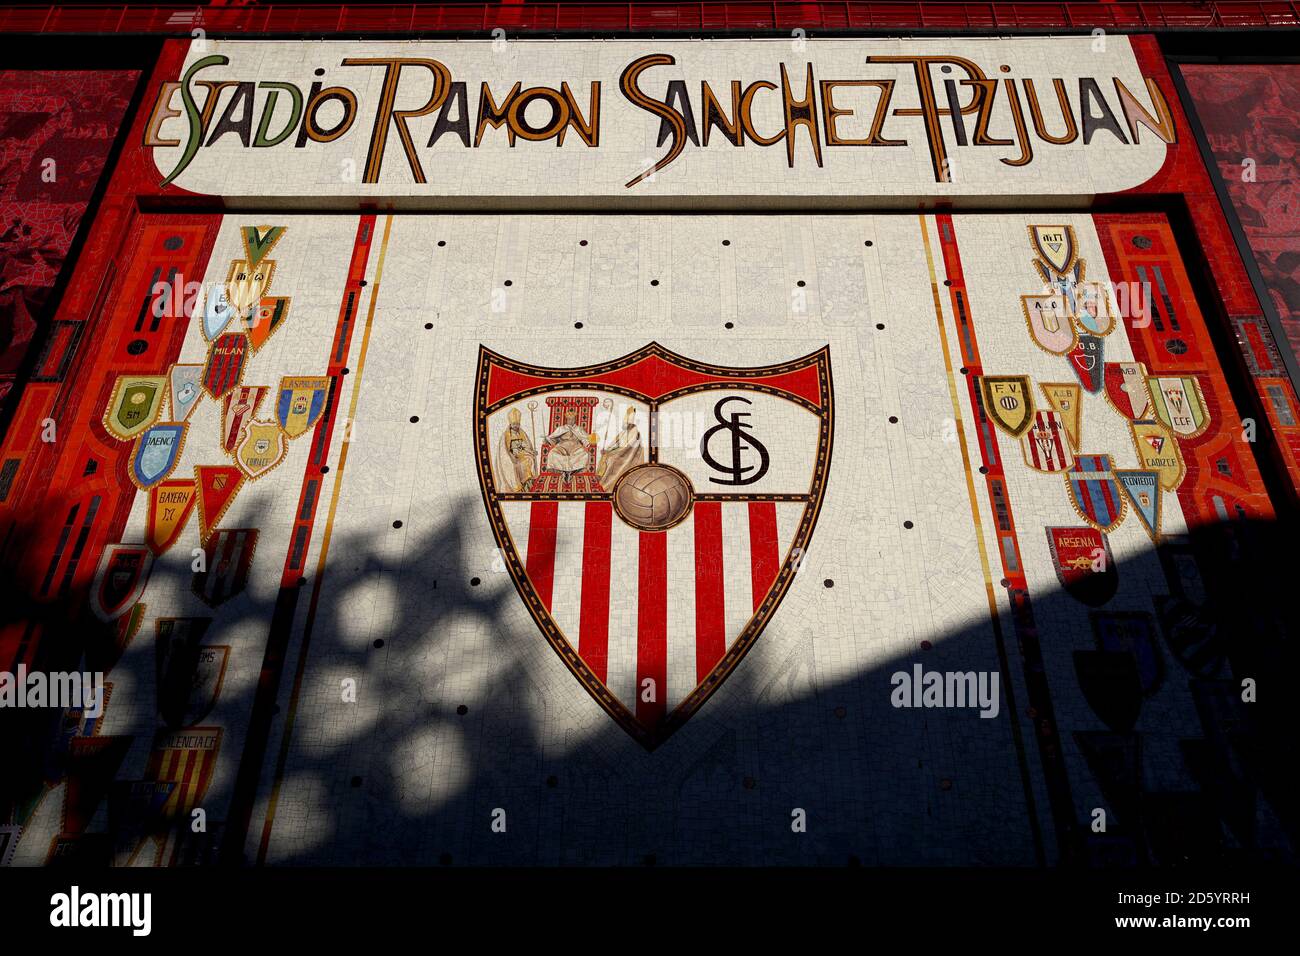 A general view of the Ramon Sanchez Pizjuan Stadium before the match begins Stock Photo